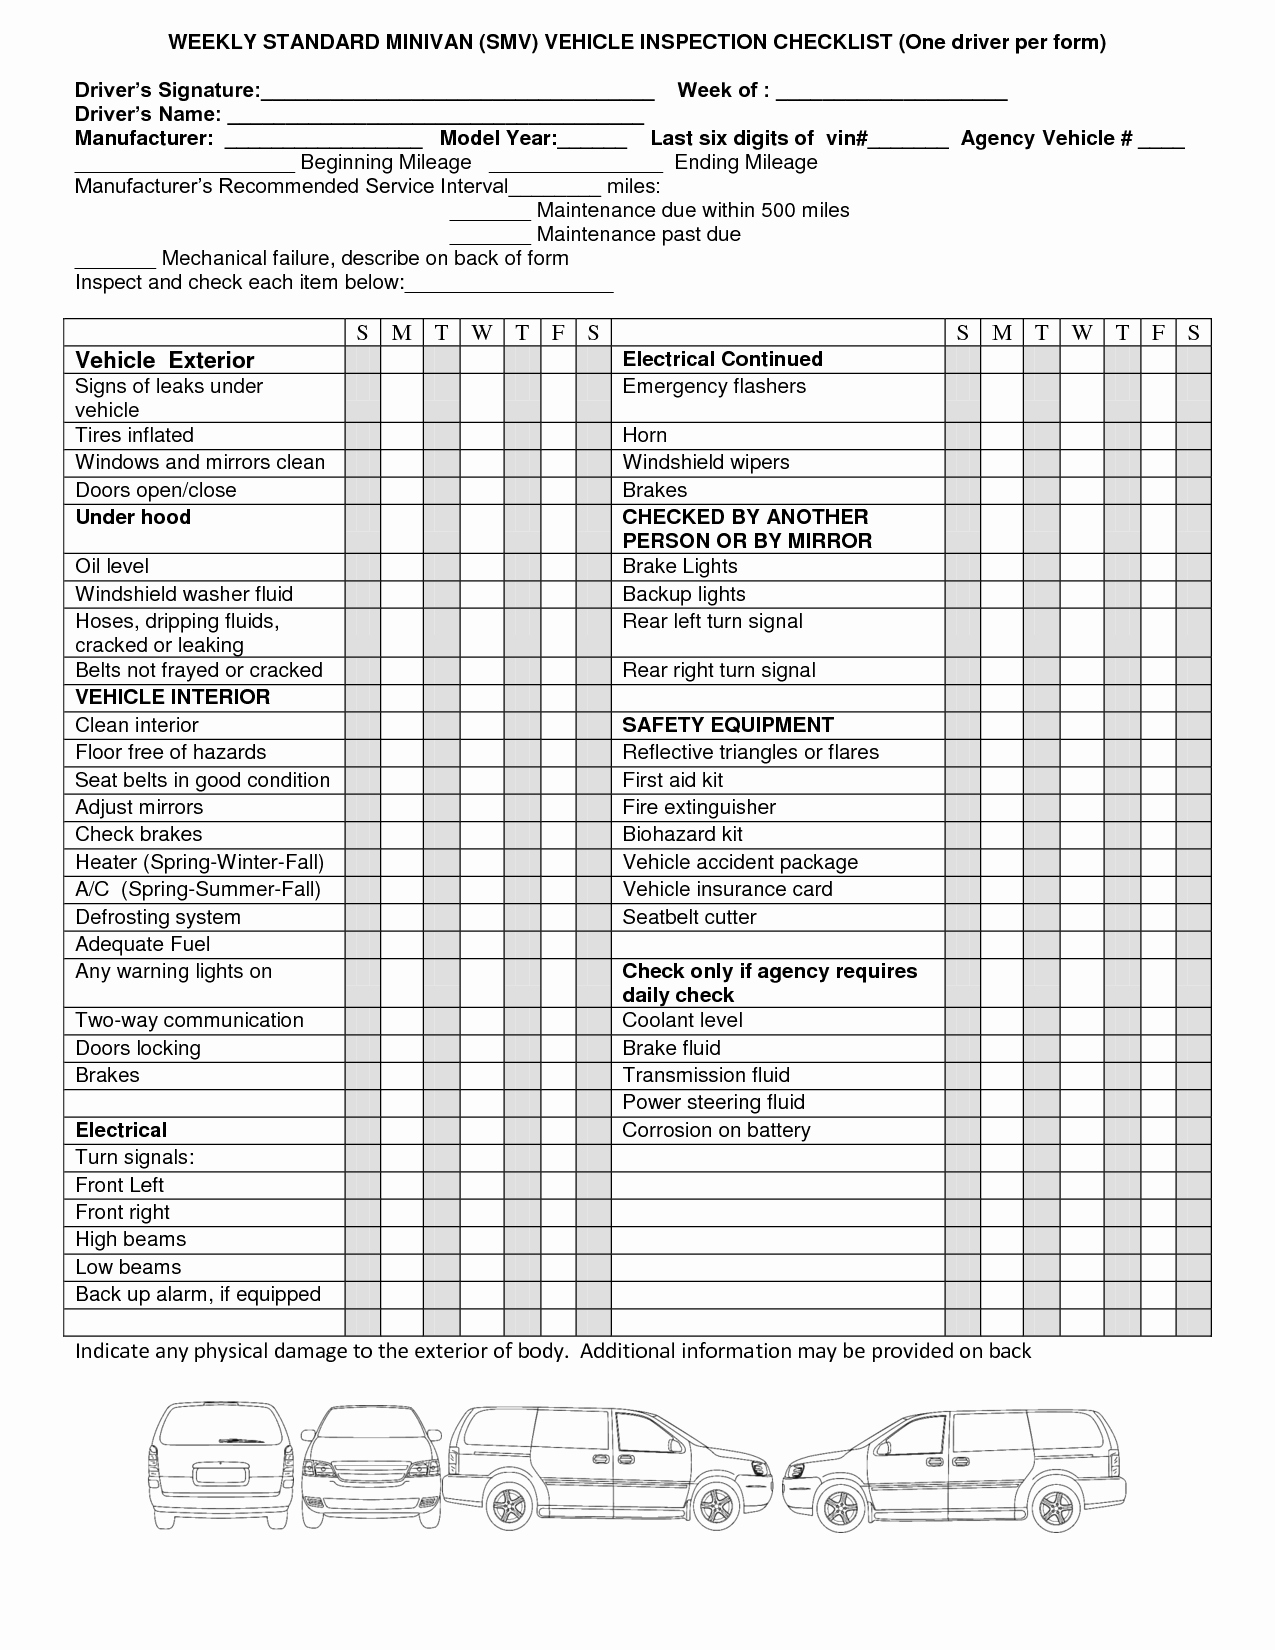 Daily Vehicle Inspection form Template Lovely Weekly Vehicle Inspection Checklist Template